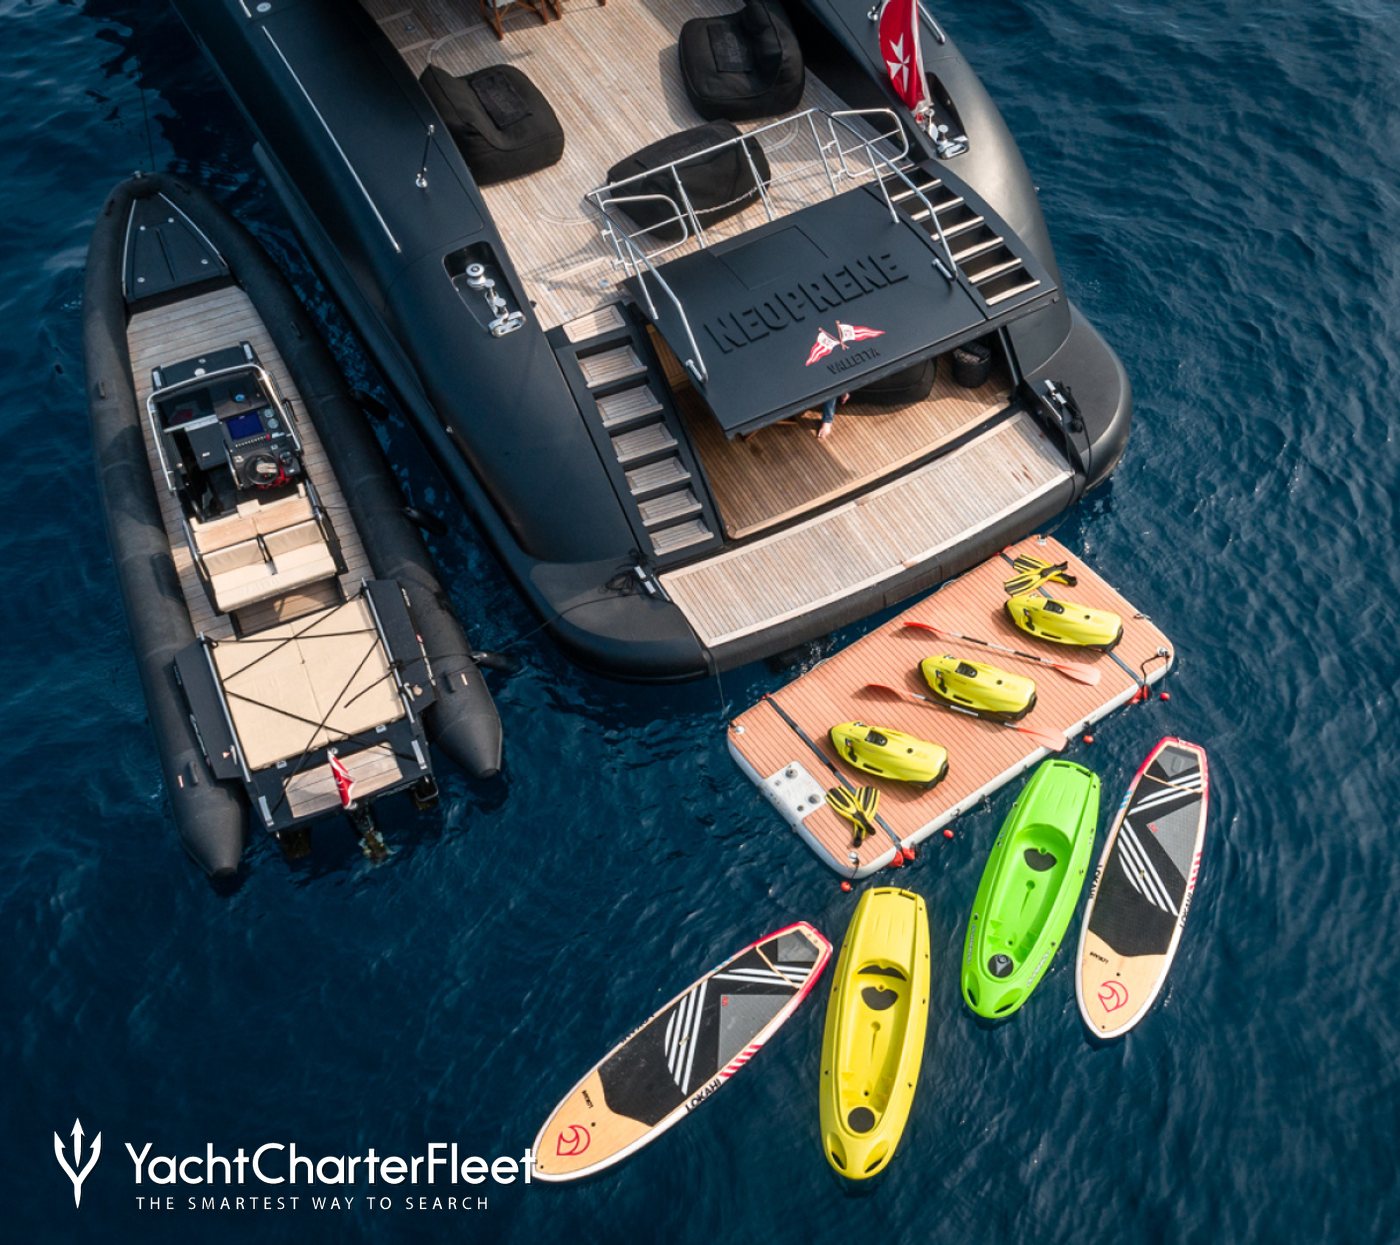 https://image.yachtcharterfleet.com/w1400/h1245/qh/ca/k29810430/cms/photo/1444753/aft-view-of-charter-yacht-neoprene-from-above-with-water-toys-behind.jpg